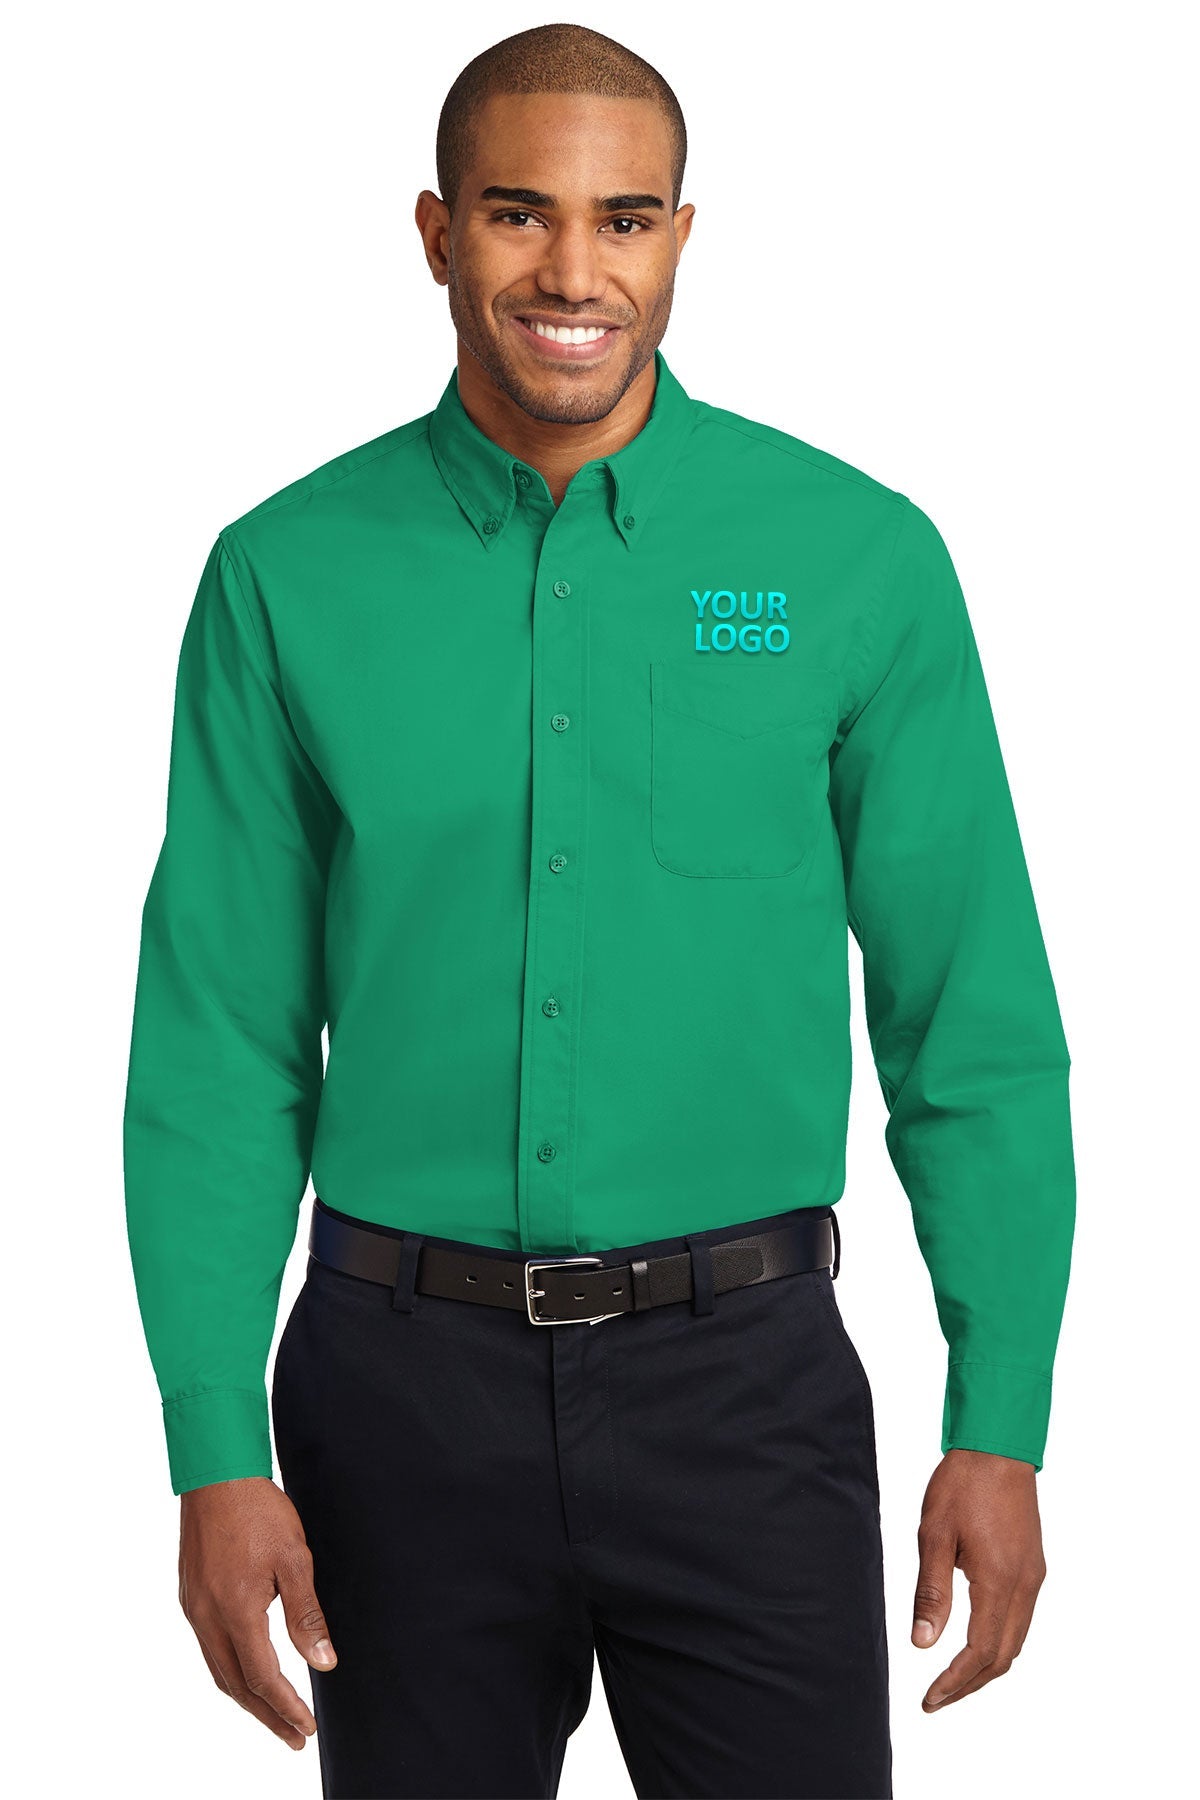 Port Authority Court Green S608 custom embroidered shirts